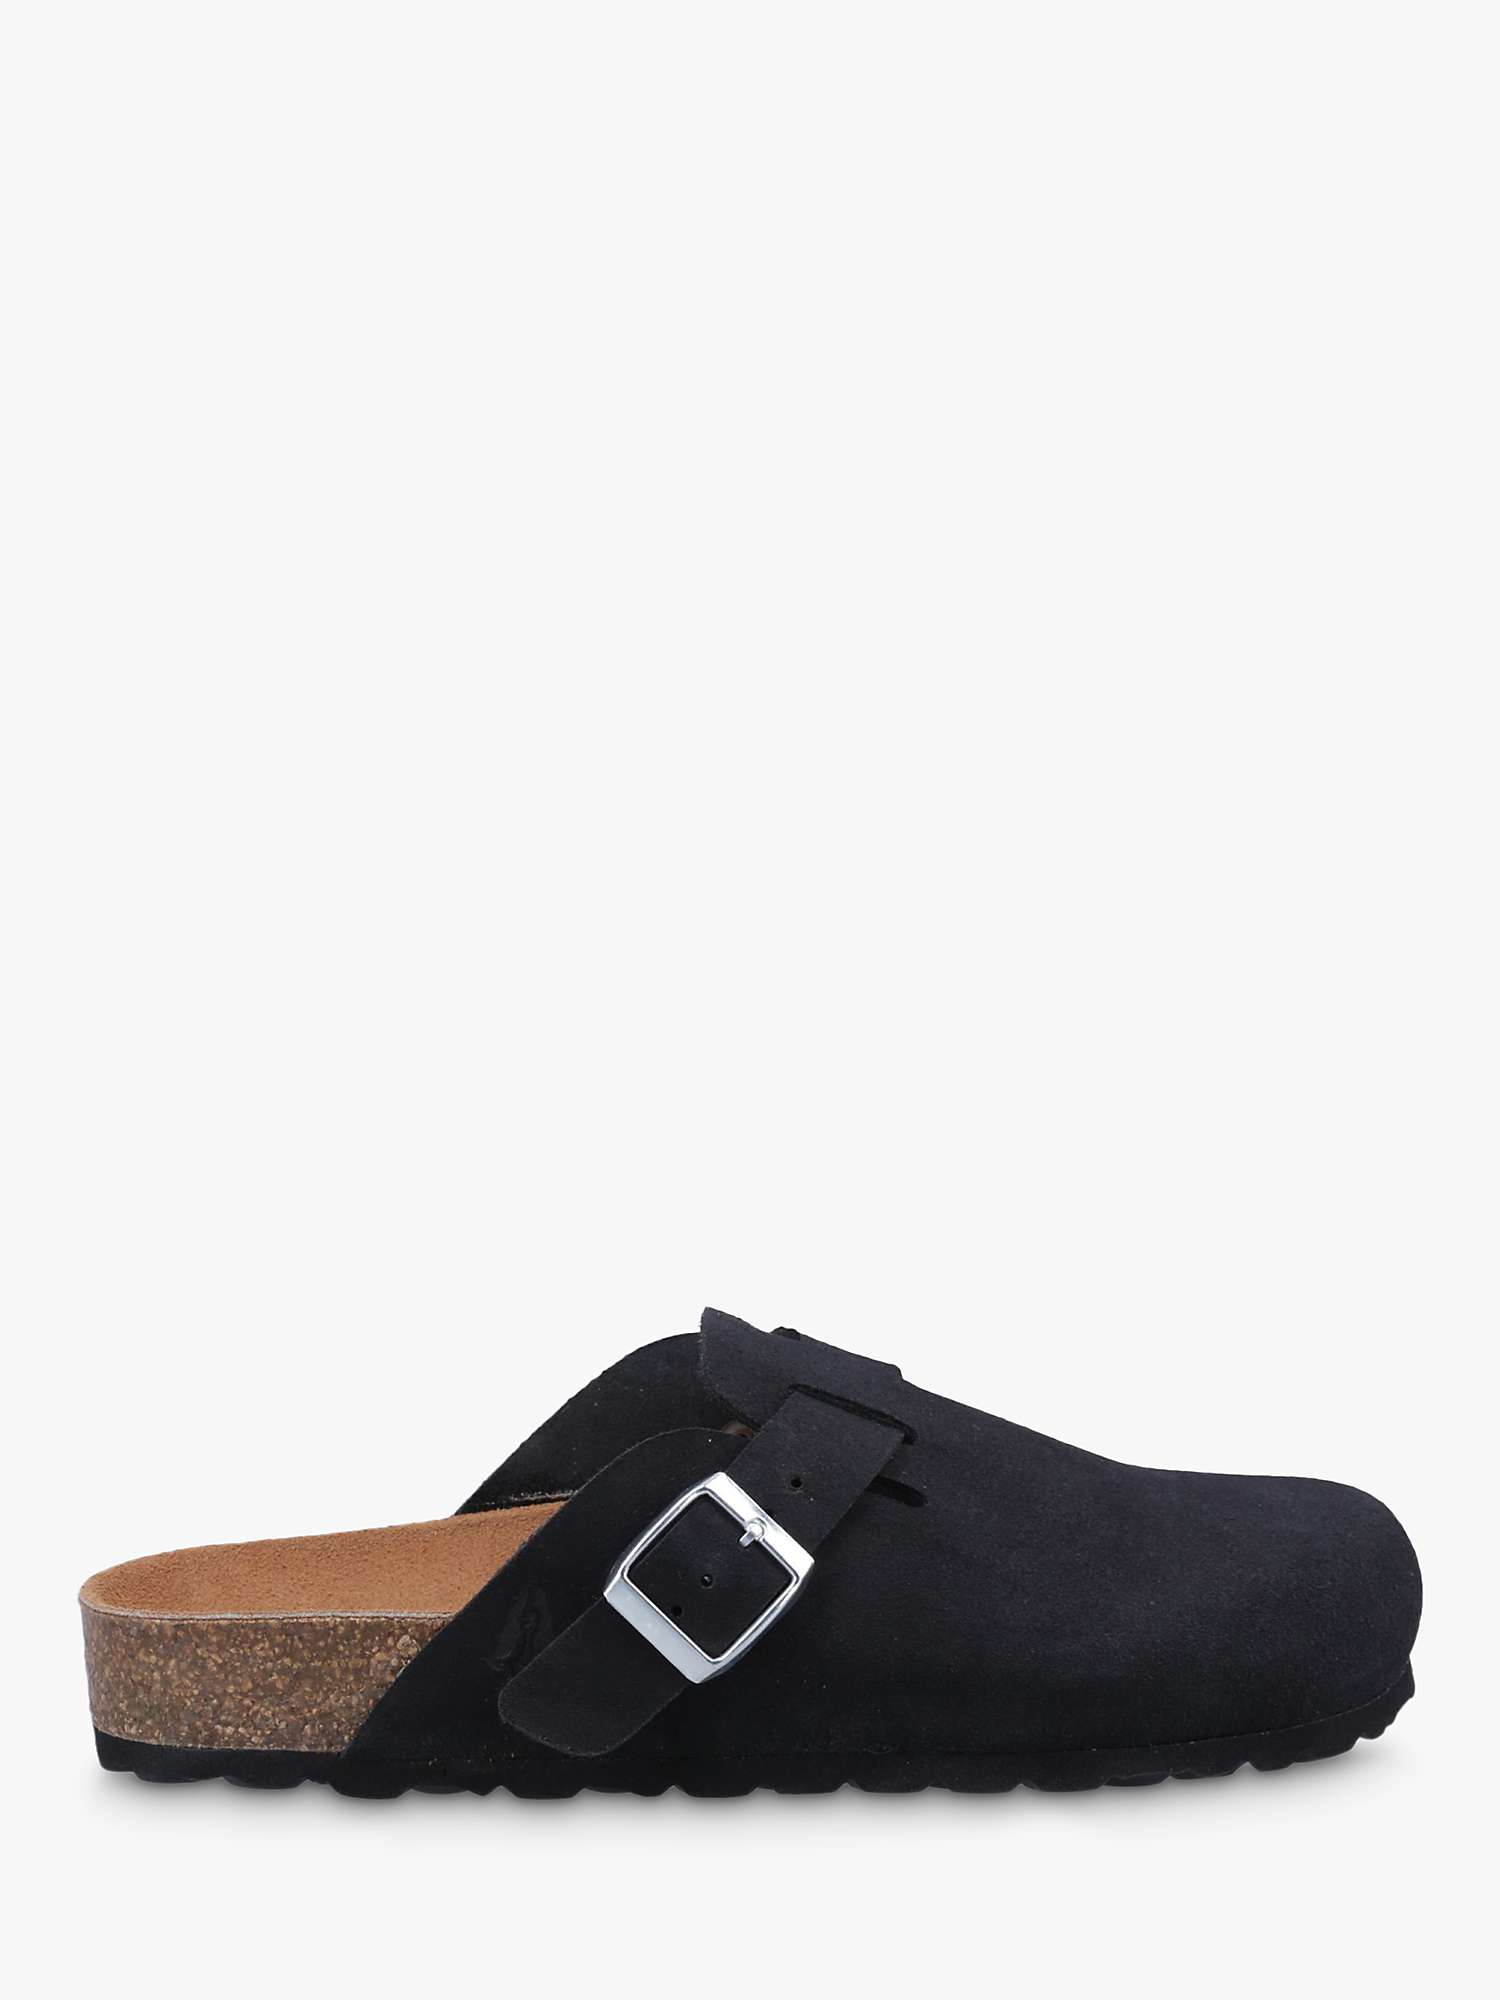 Buy Hush Puppies Bailey Suede Mule Clogs Online at johnlewis.com